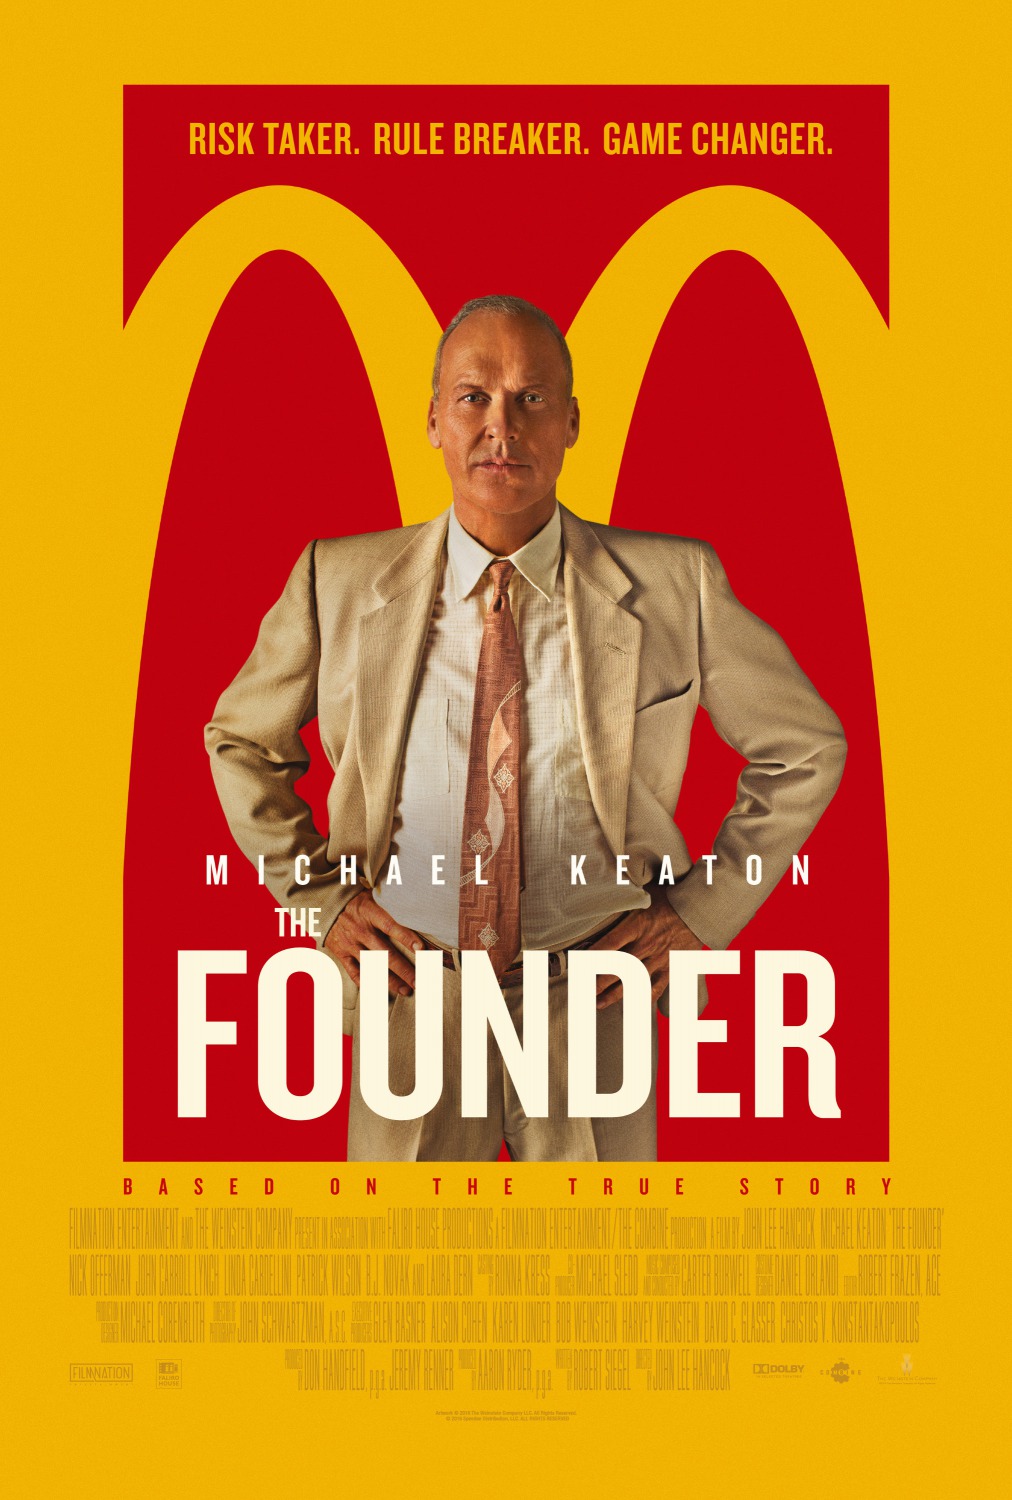 The Founder: Essential Film for Entrepreneurs About Need to Protect Their Business